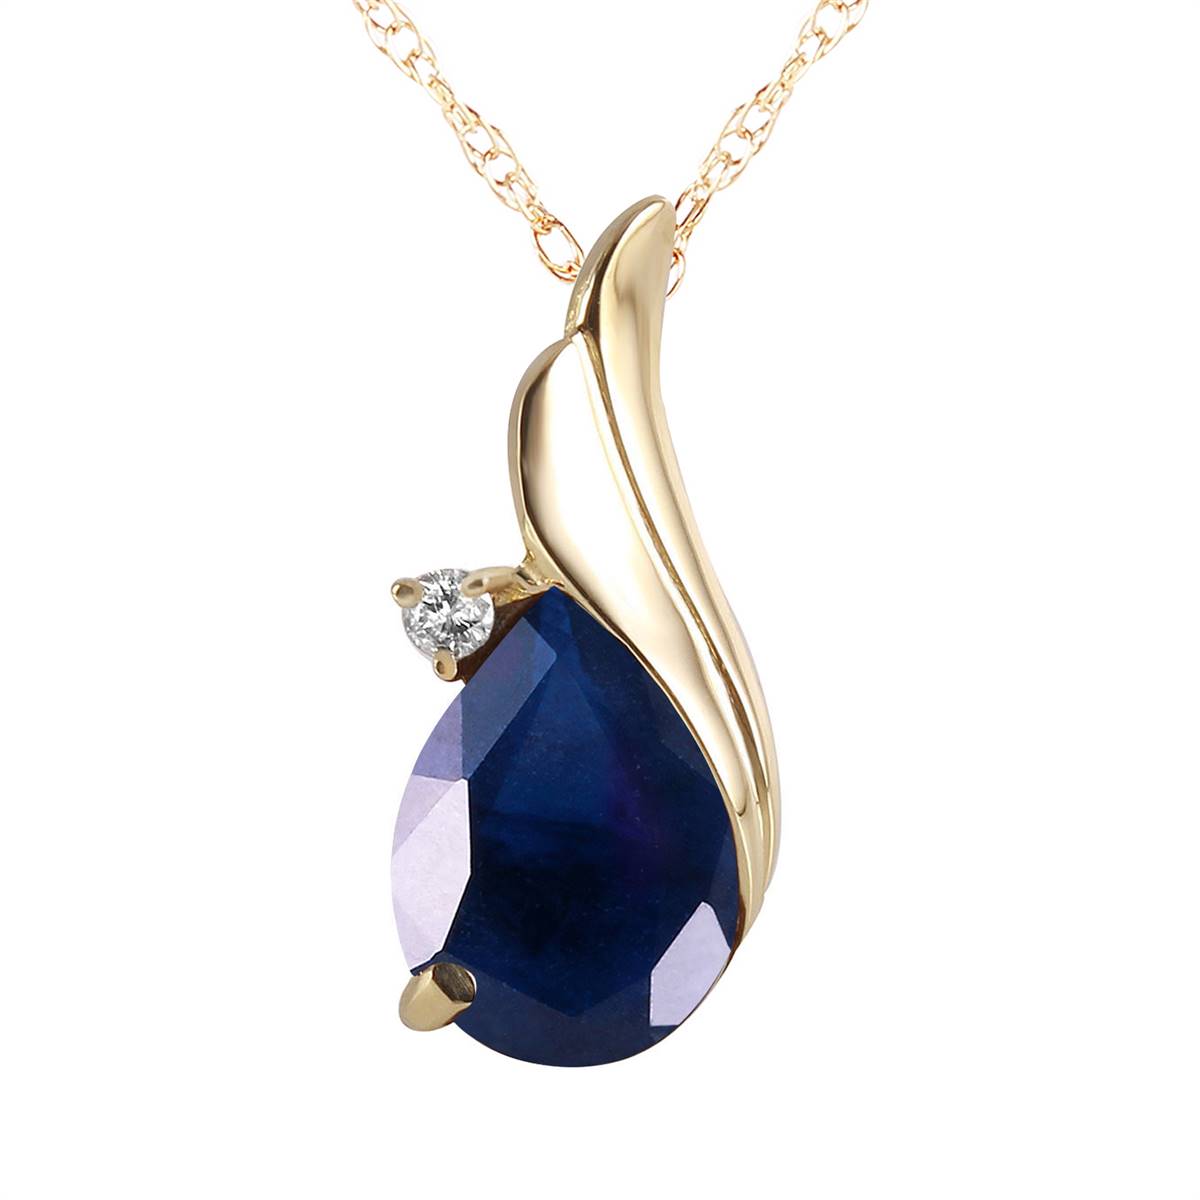 14K Solid Yellow Gold Diamond & Sapphire Necklace